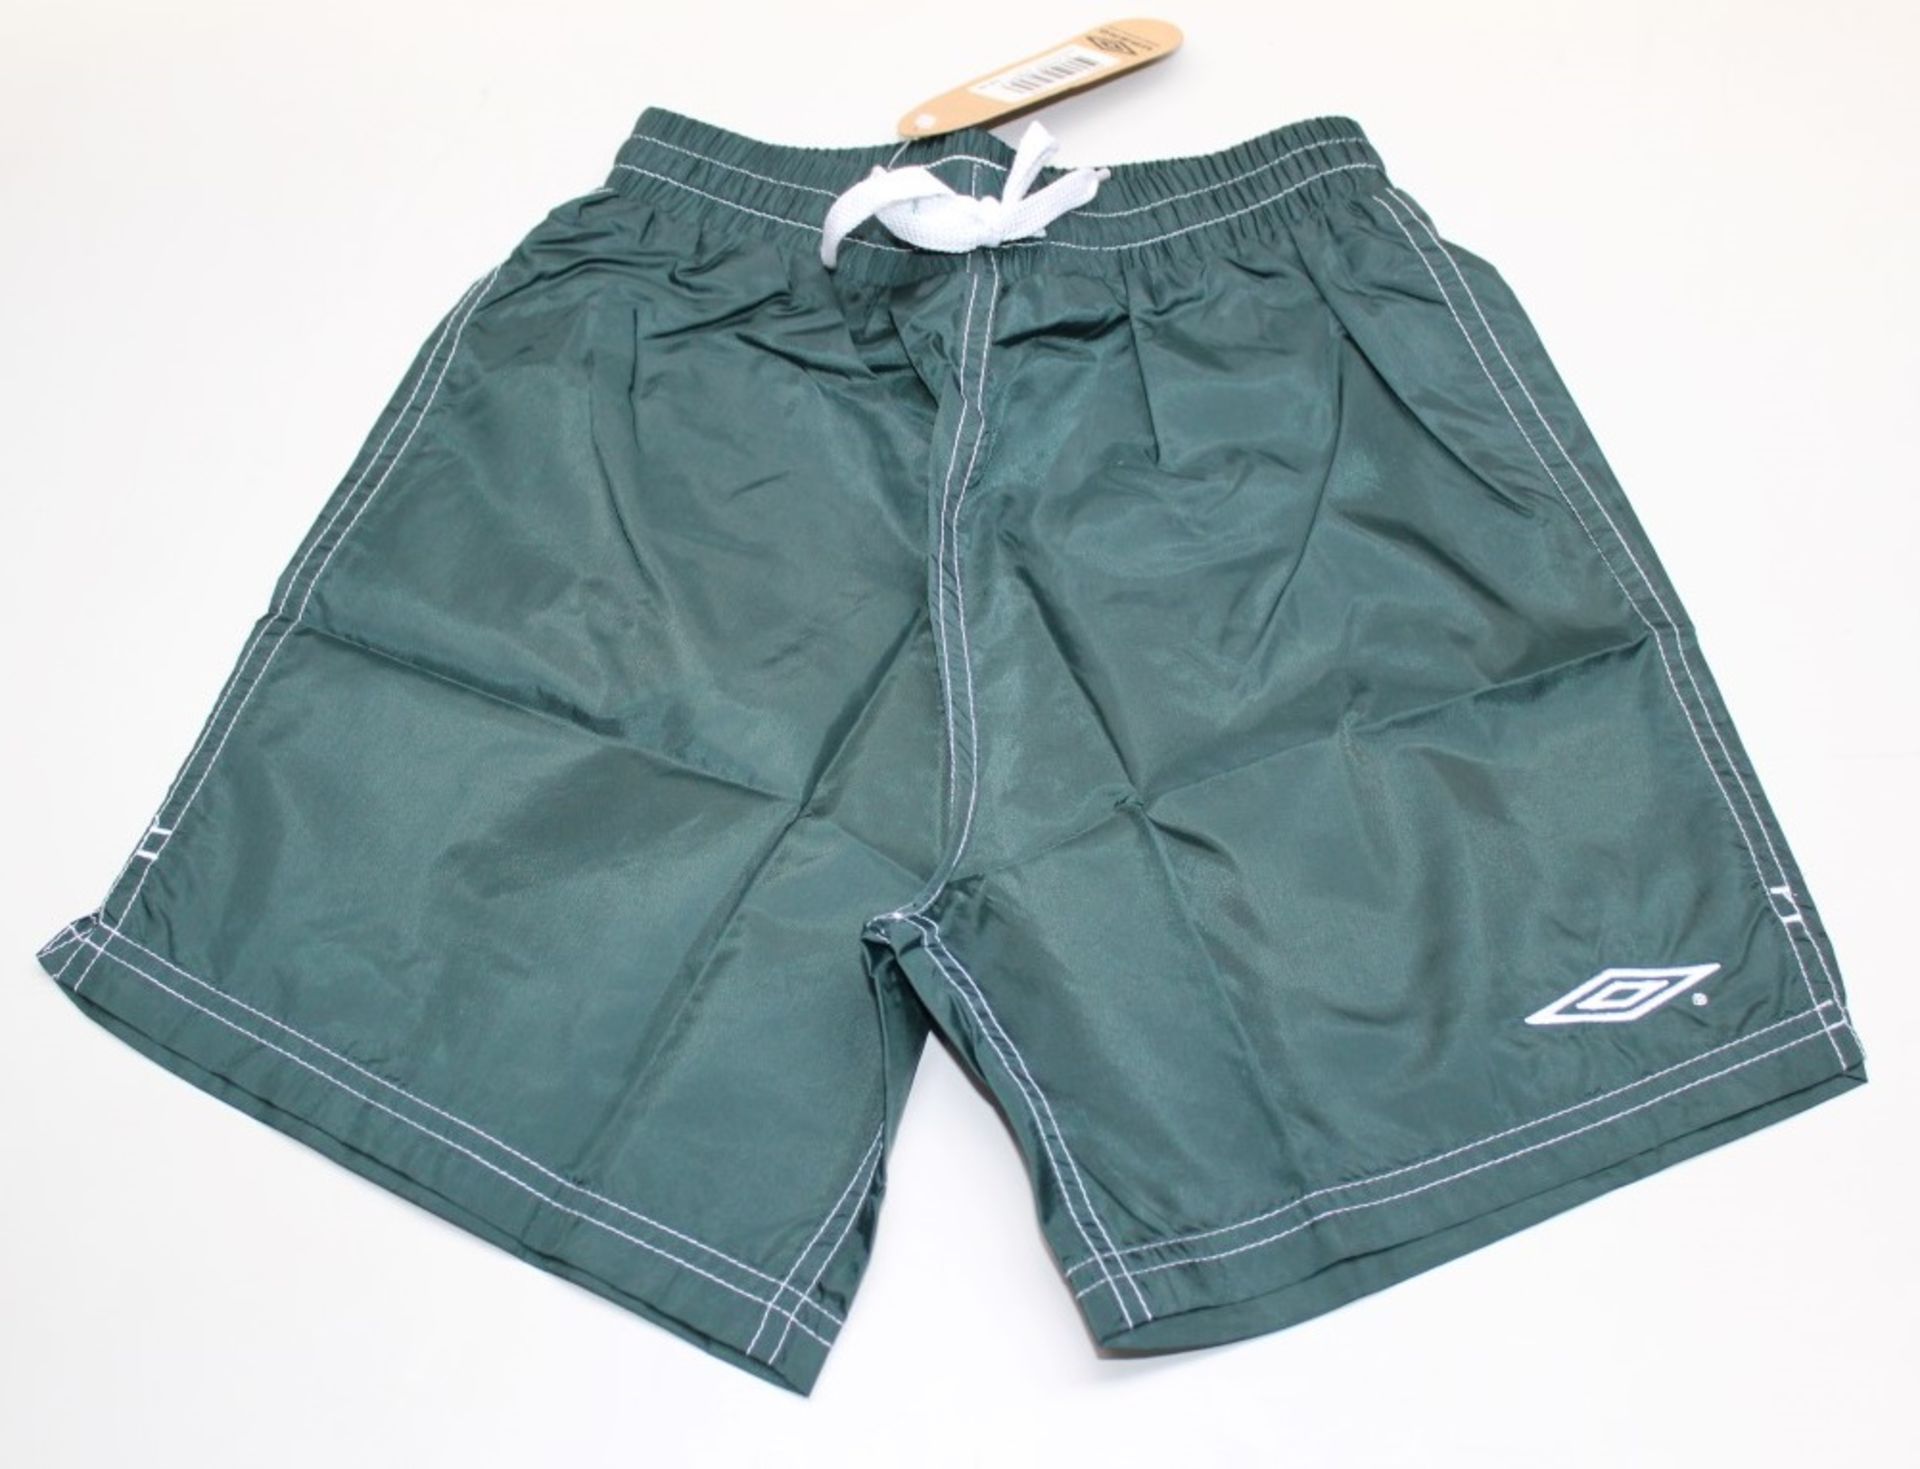 31 x Assorted Umbro Rio Grande Shorts - Youth Sizes - Size: All Youth Medium - Colour: Green / - Image 3 of 5